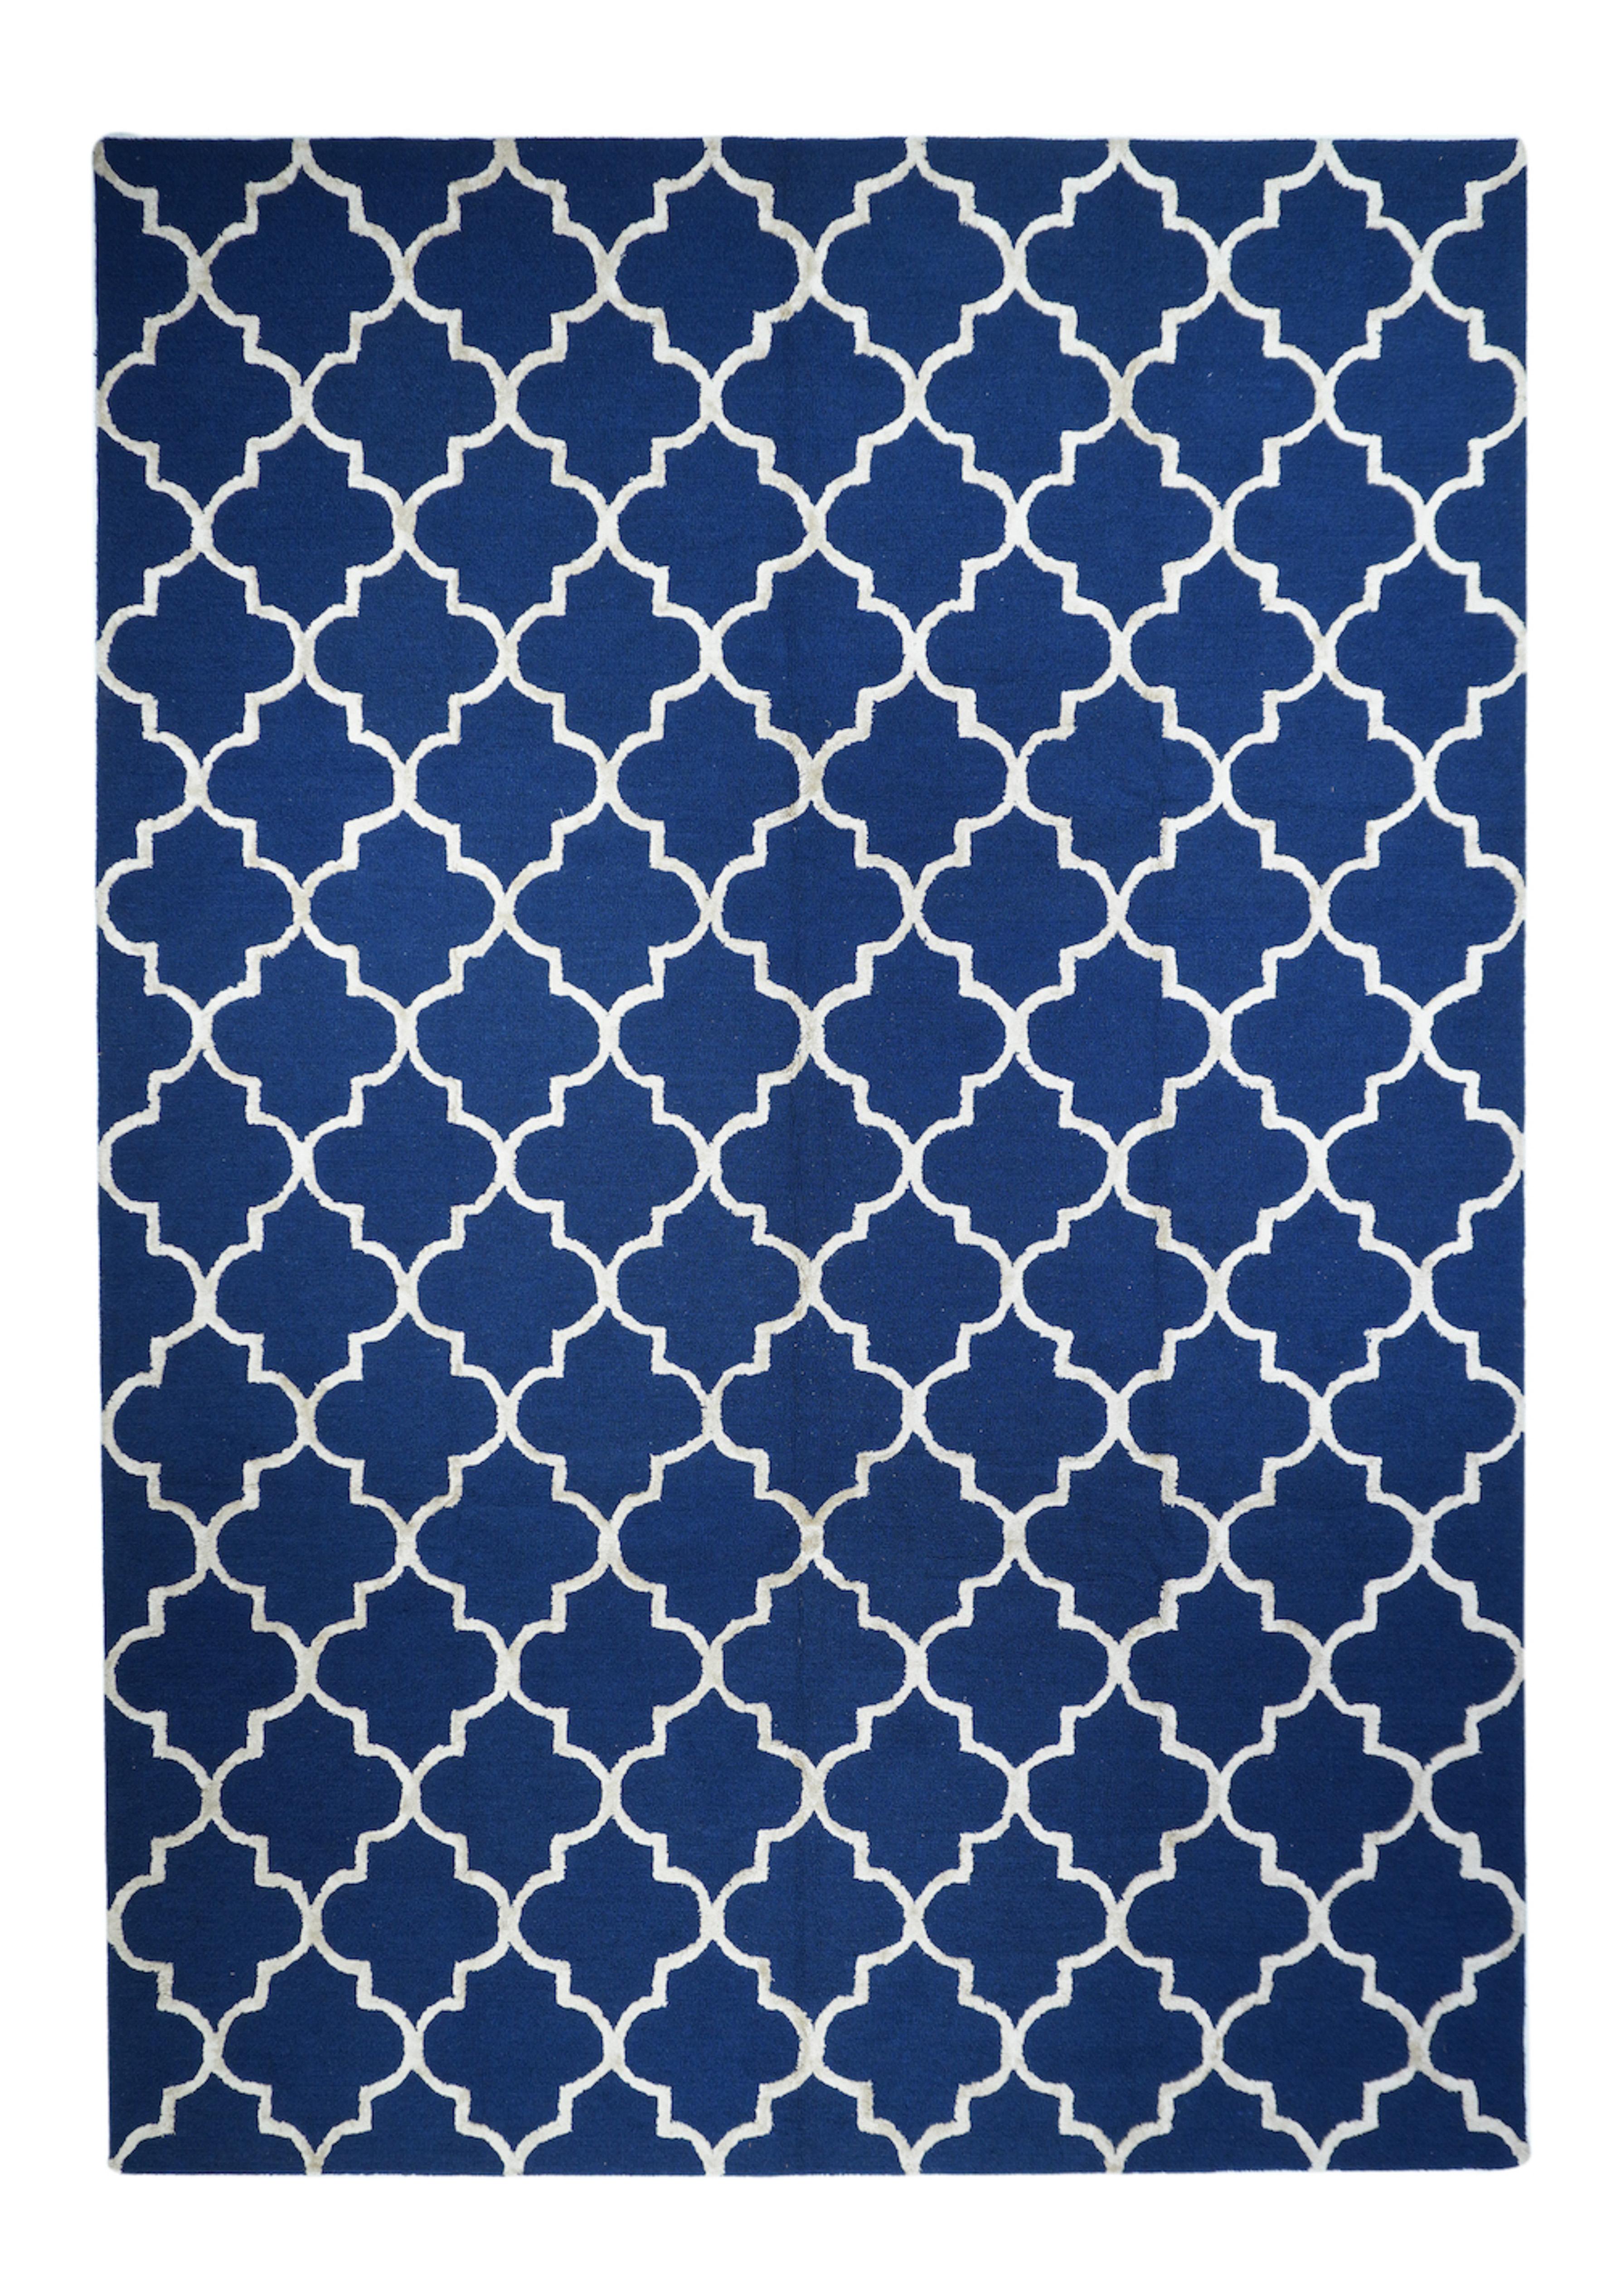 Contemporary Rug 9'3'' x 13'0'' 
This recent, borderless bitonal room size shows a pared-down cartouche lattice in Mughal style, but with the defined reserves unpatterned. Looks like an India jali (stone window screen). Balanced bilaterally, but